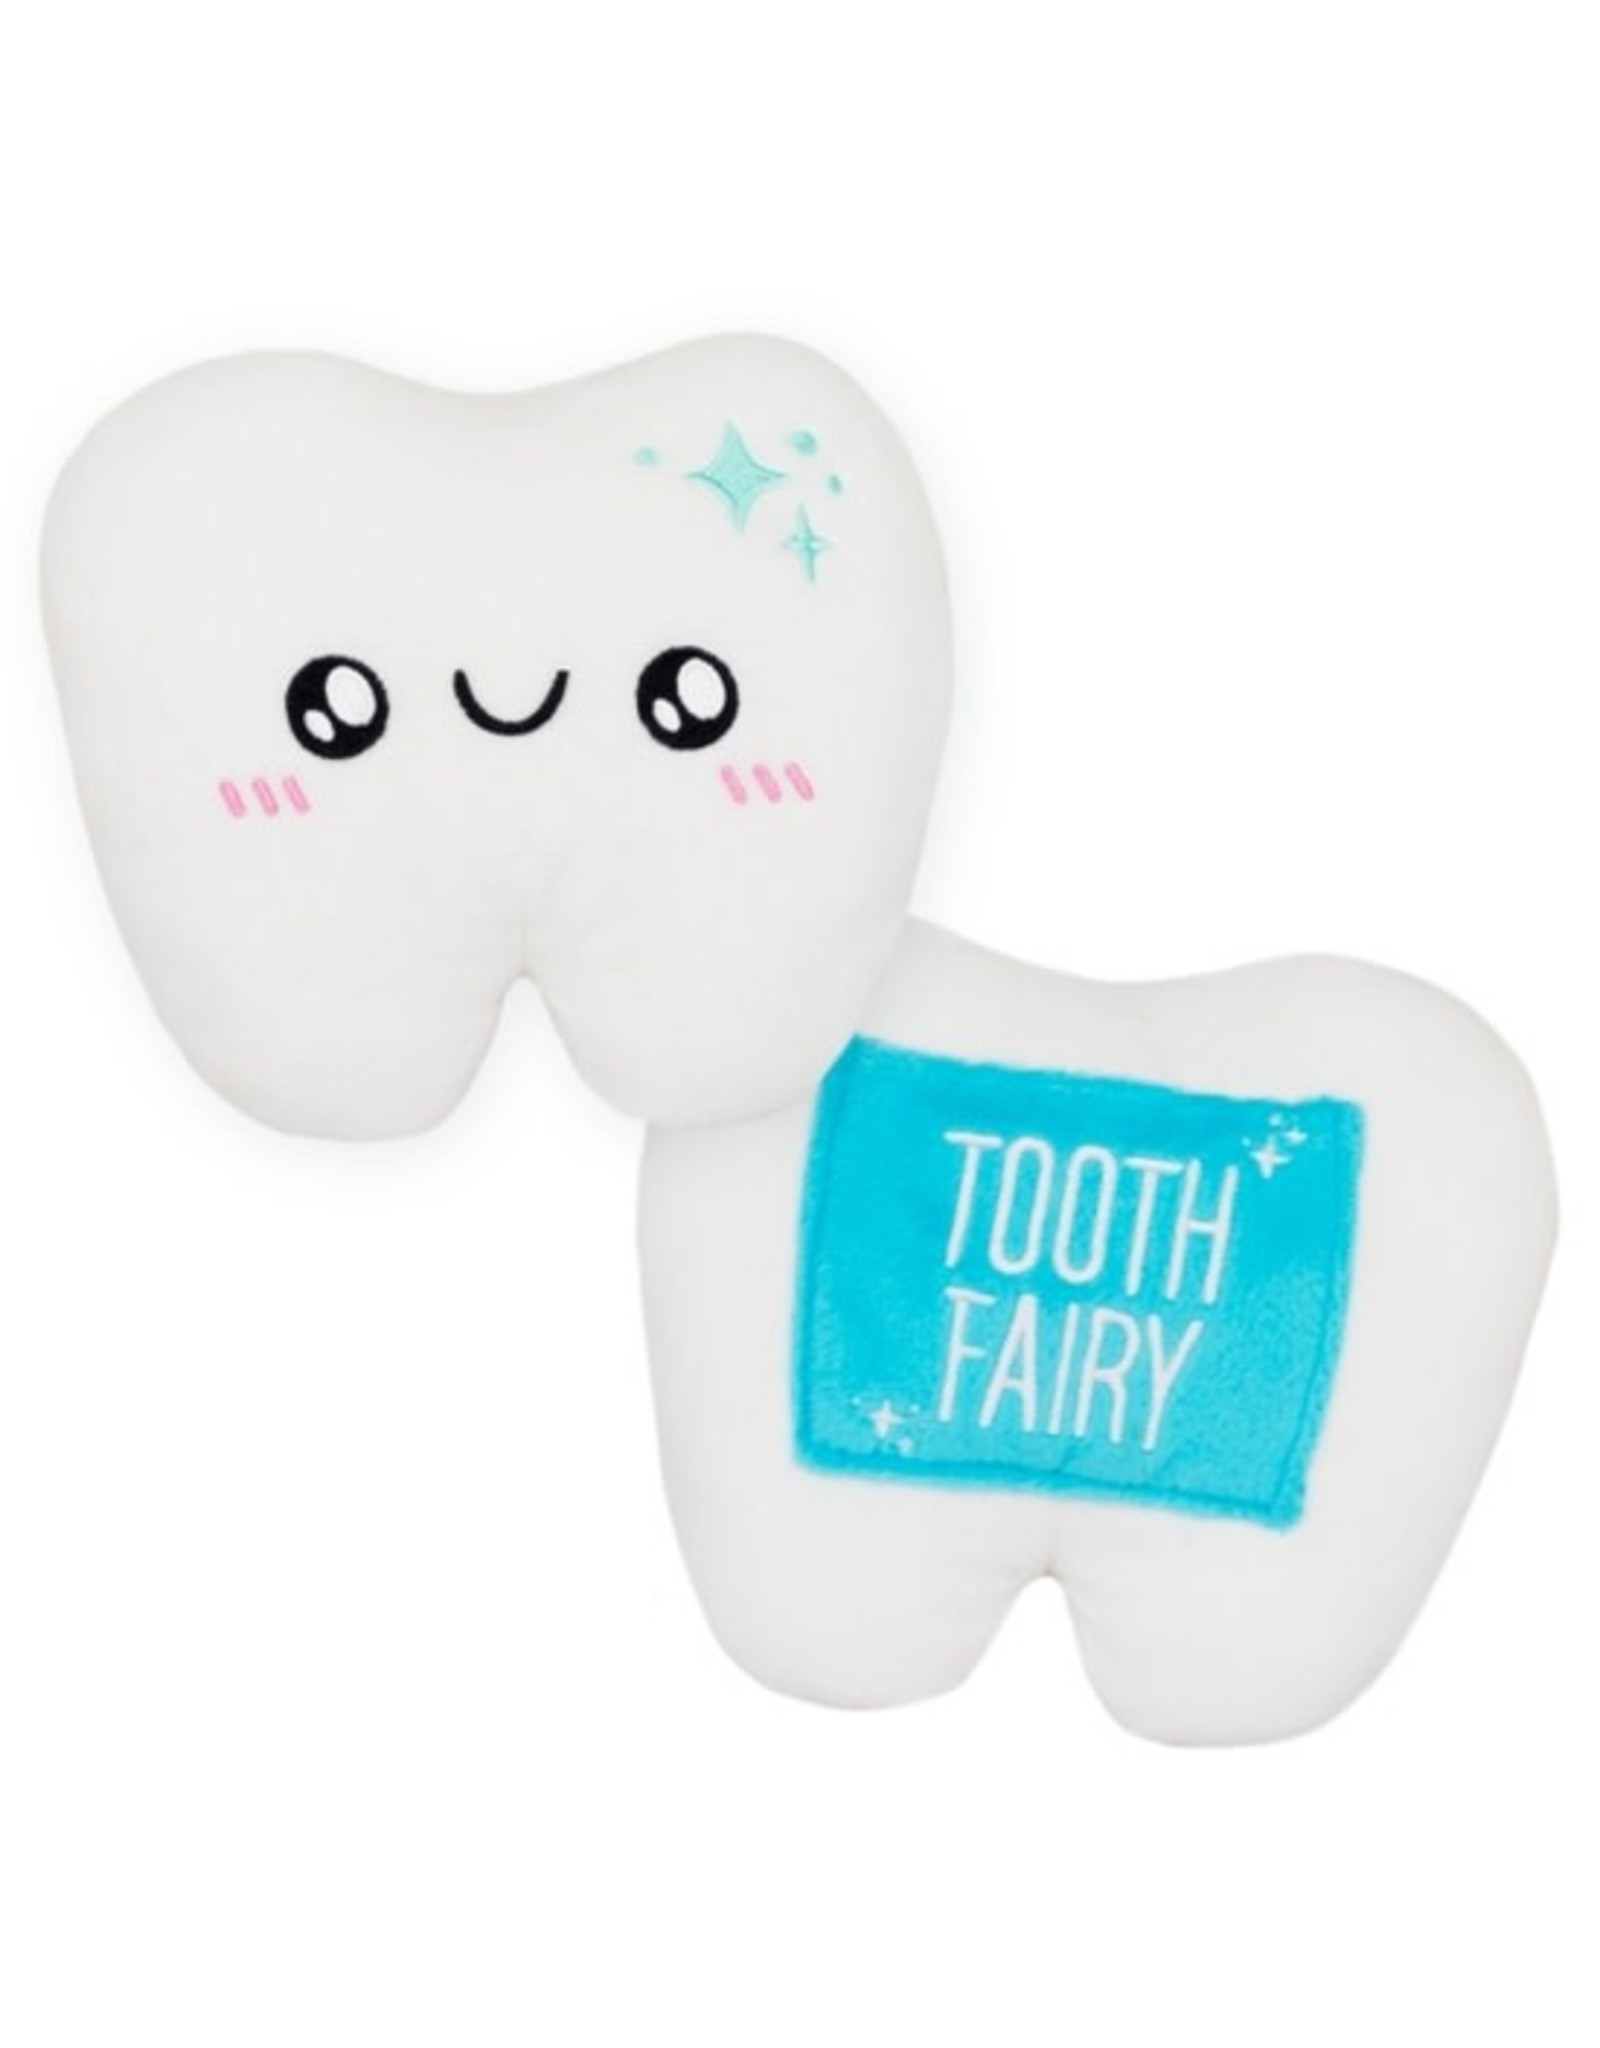 Tooth Fairy Pillow Squishable